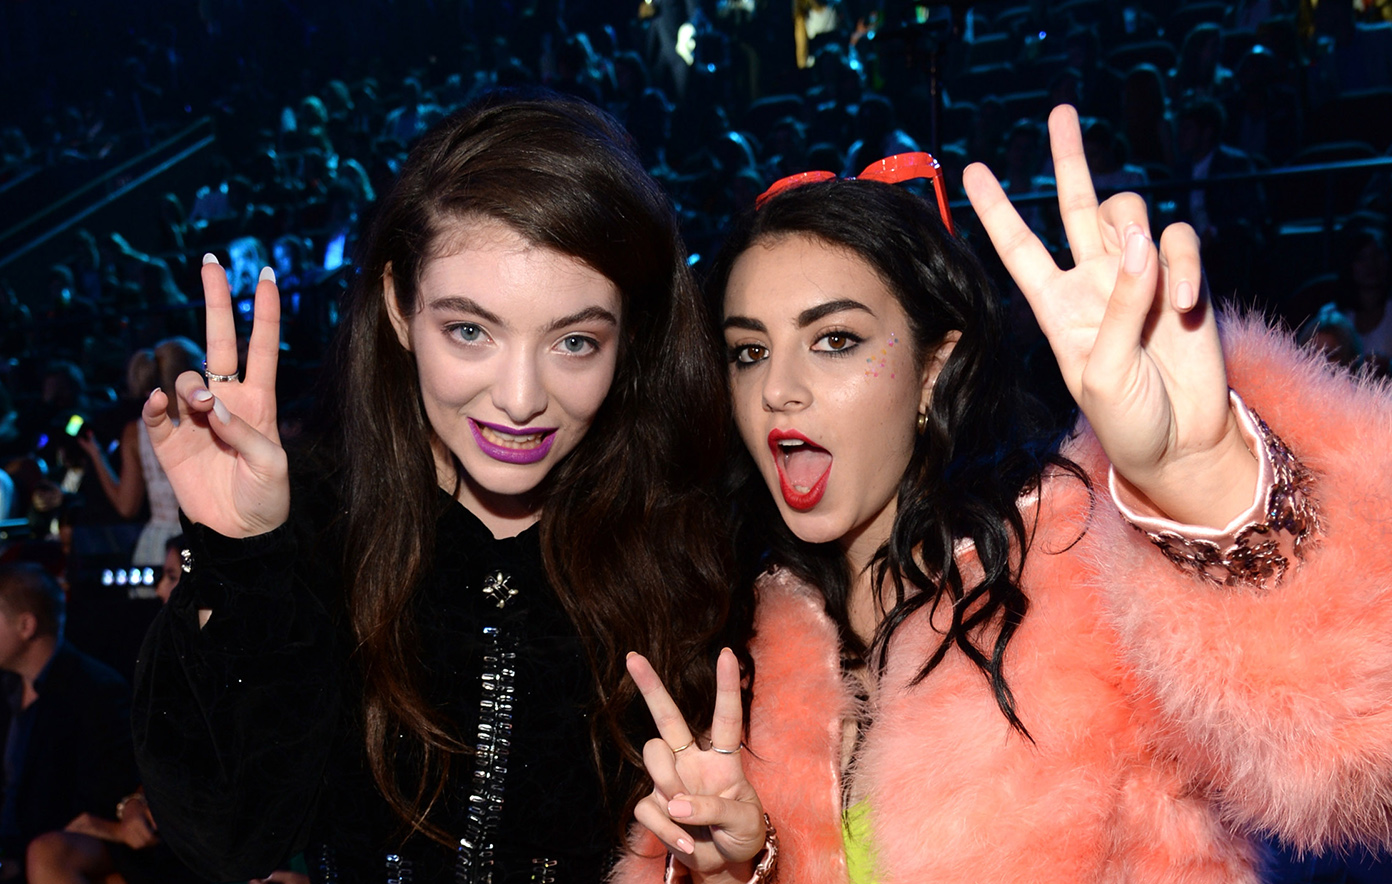 Fans, peers react to Charli XCX and Lorde’s ‘Girl, so confusing’ collaboration: “I cry listening to it now”